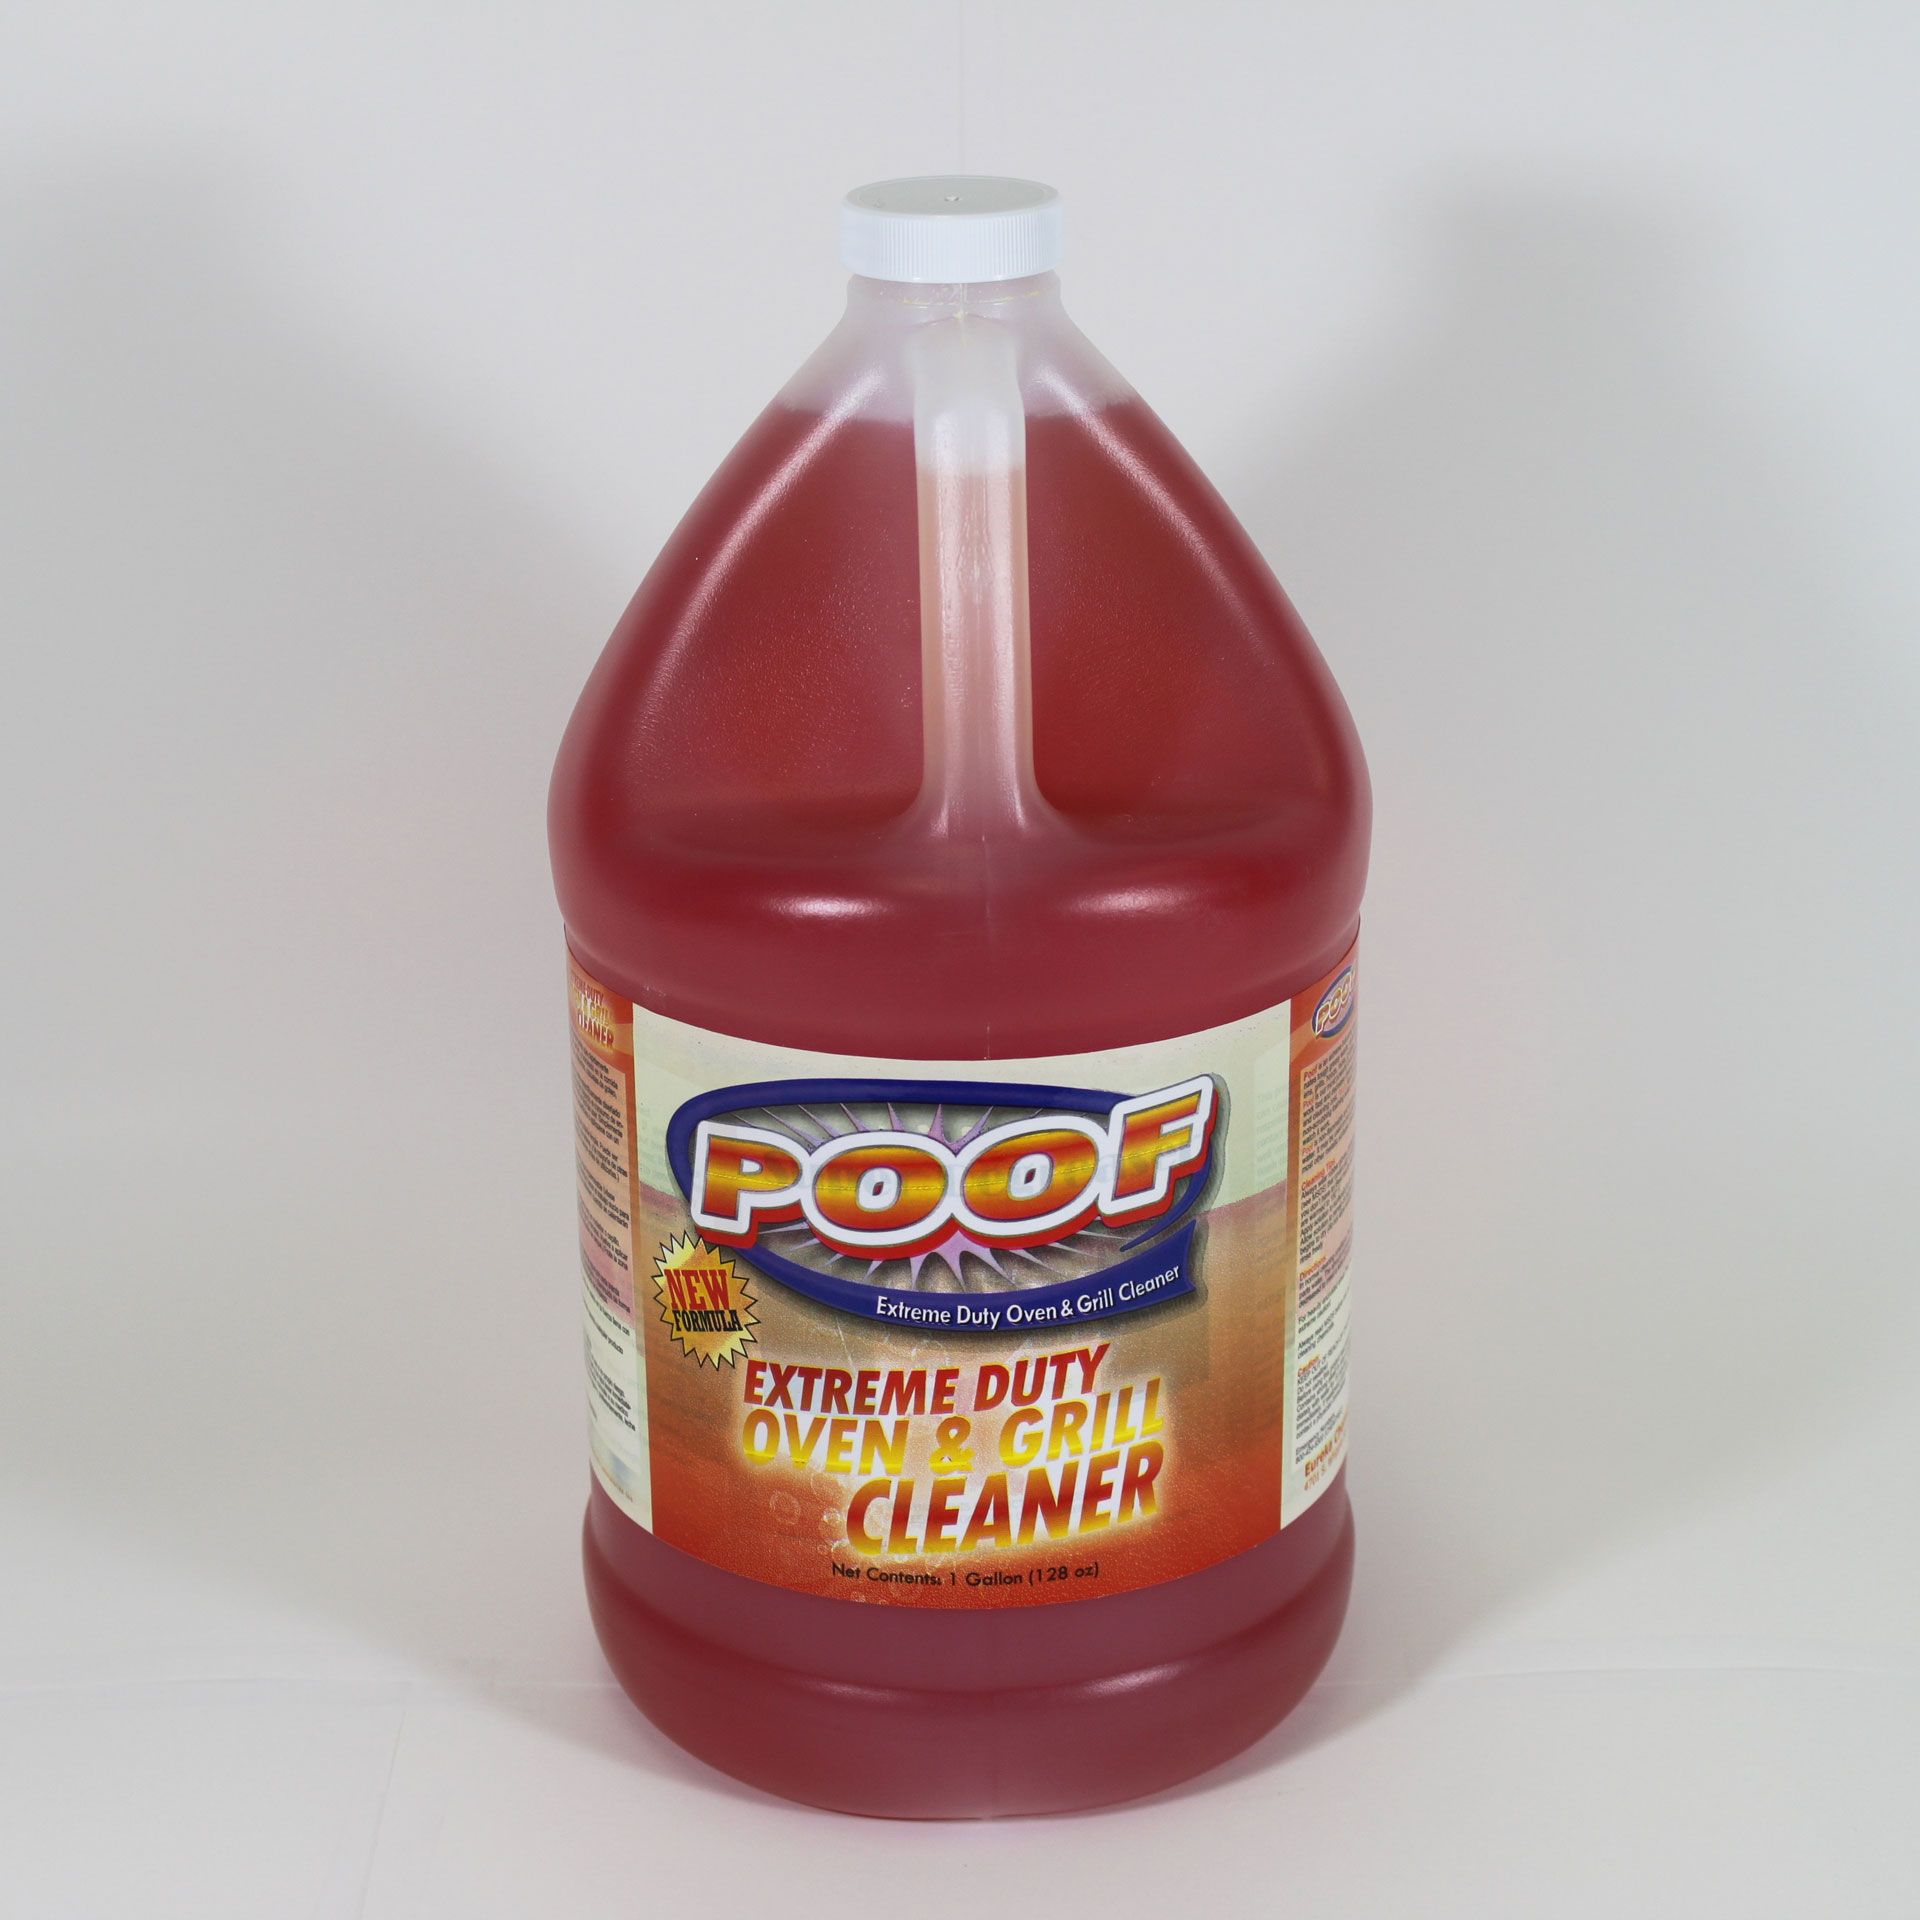 Bottle of Poof oven and grill cleaner.